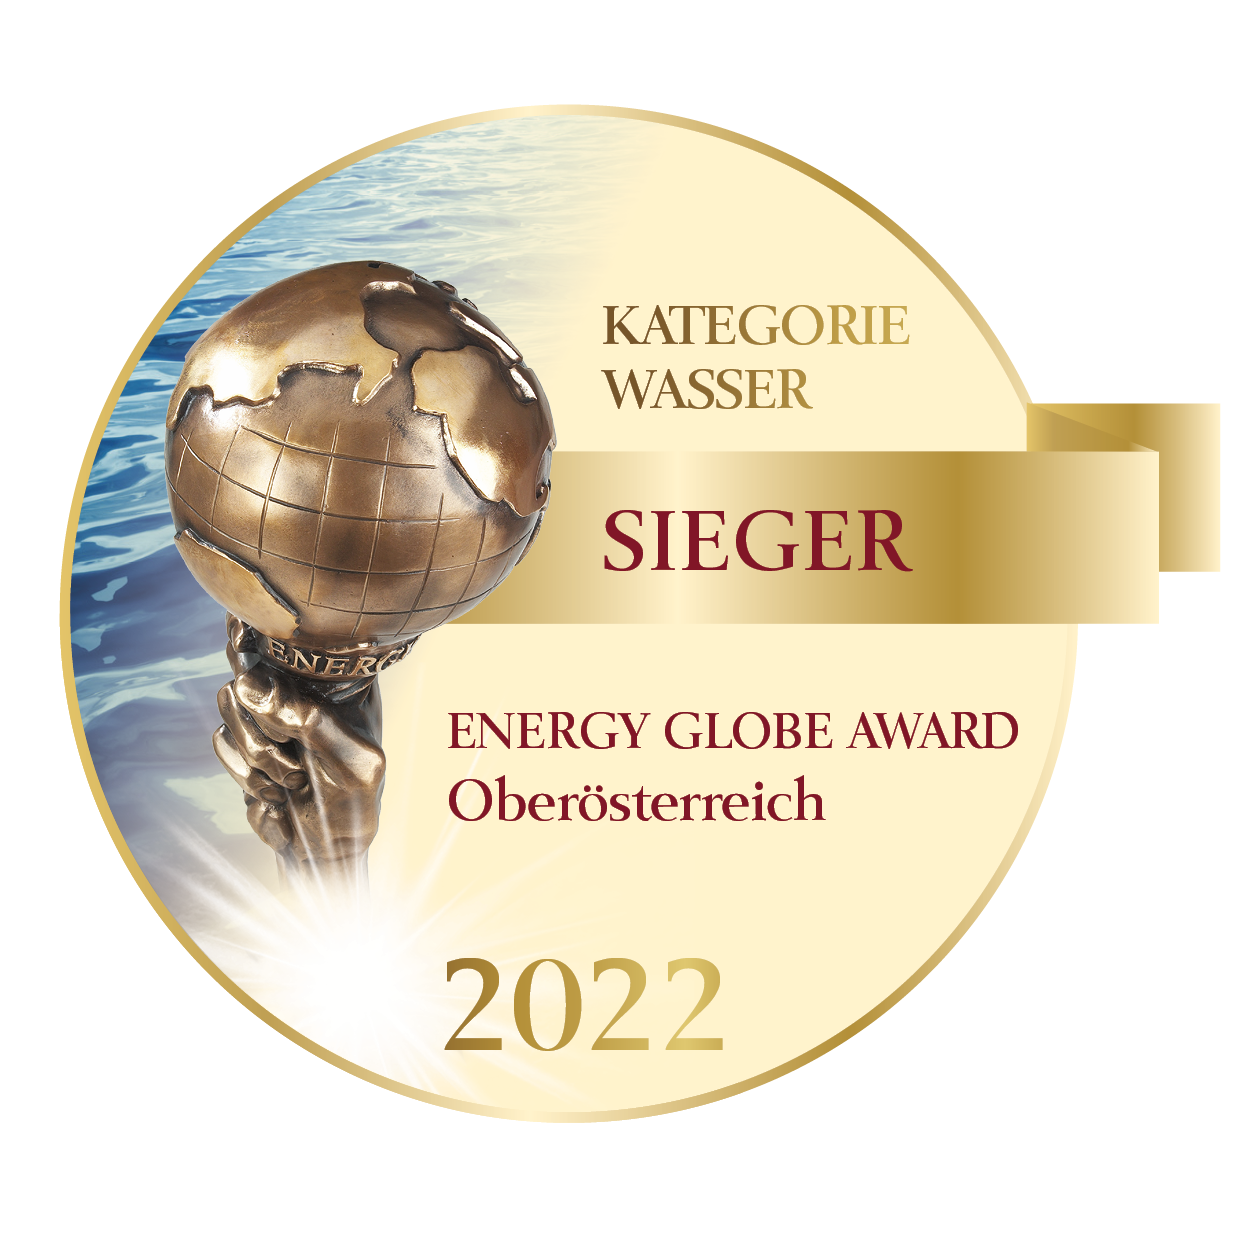 Energy Globe Upper Austria Award for energy from wastewater